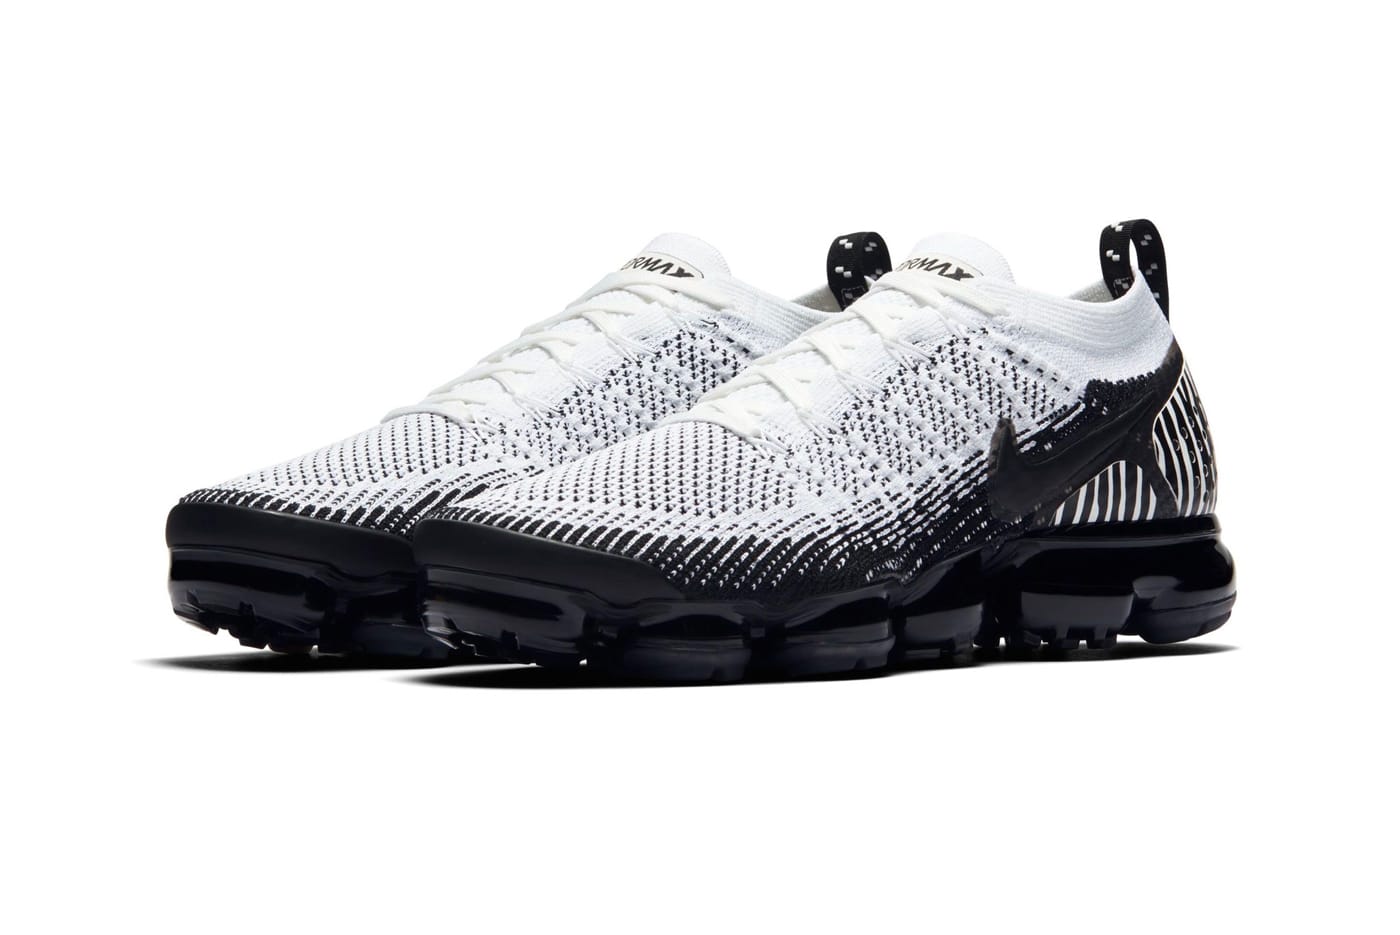 Nike Is Readying the Air VaporMax 2.0 “Zebra” | HYPEBEAST